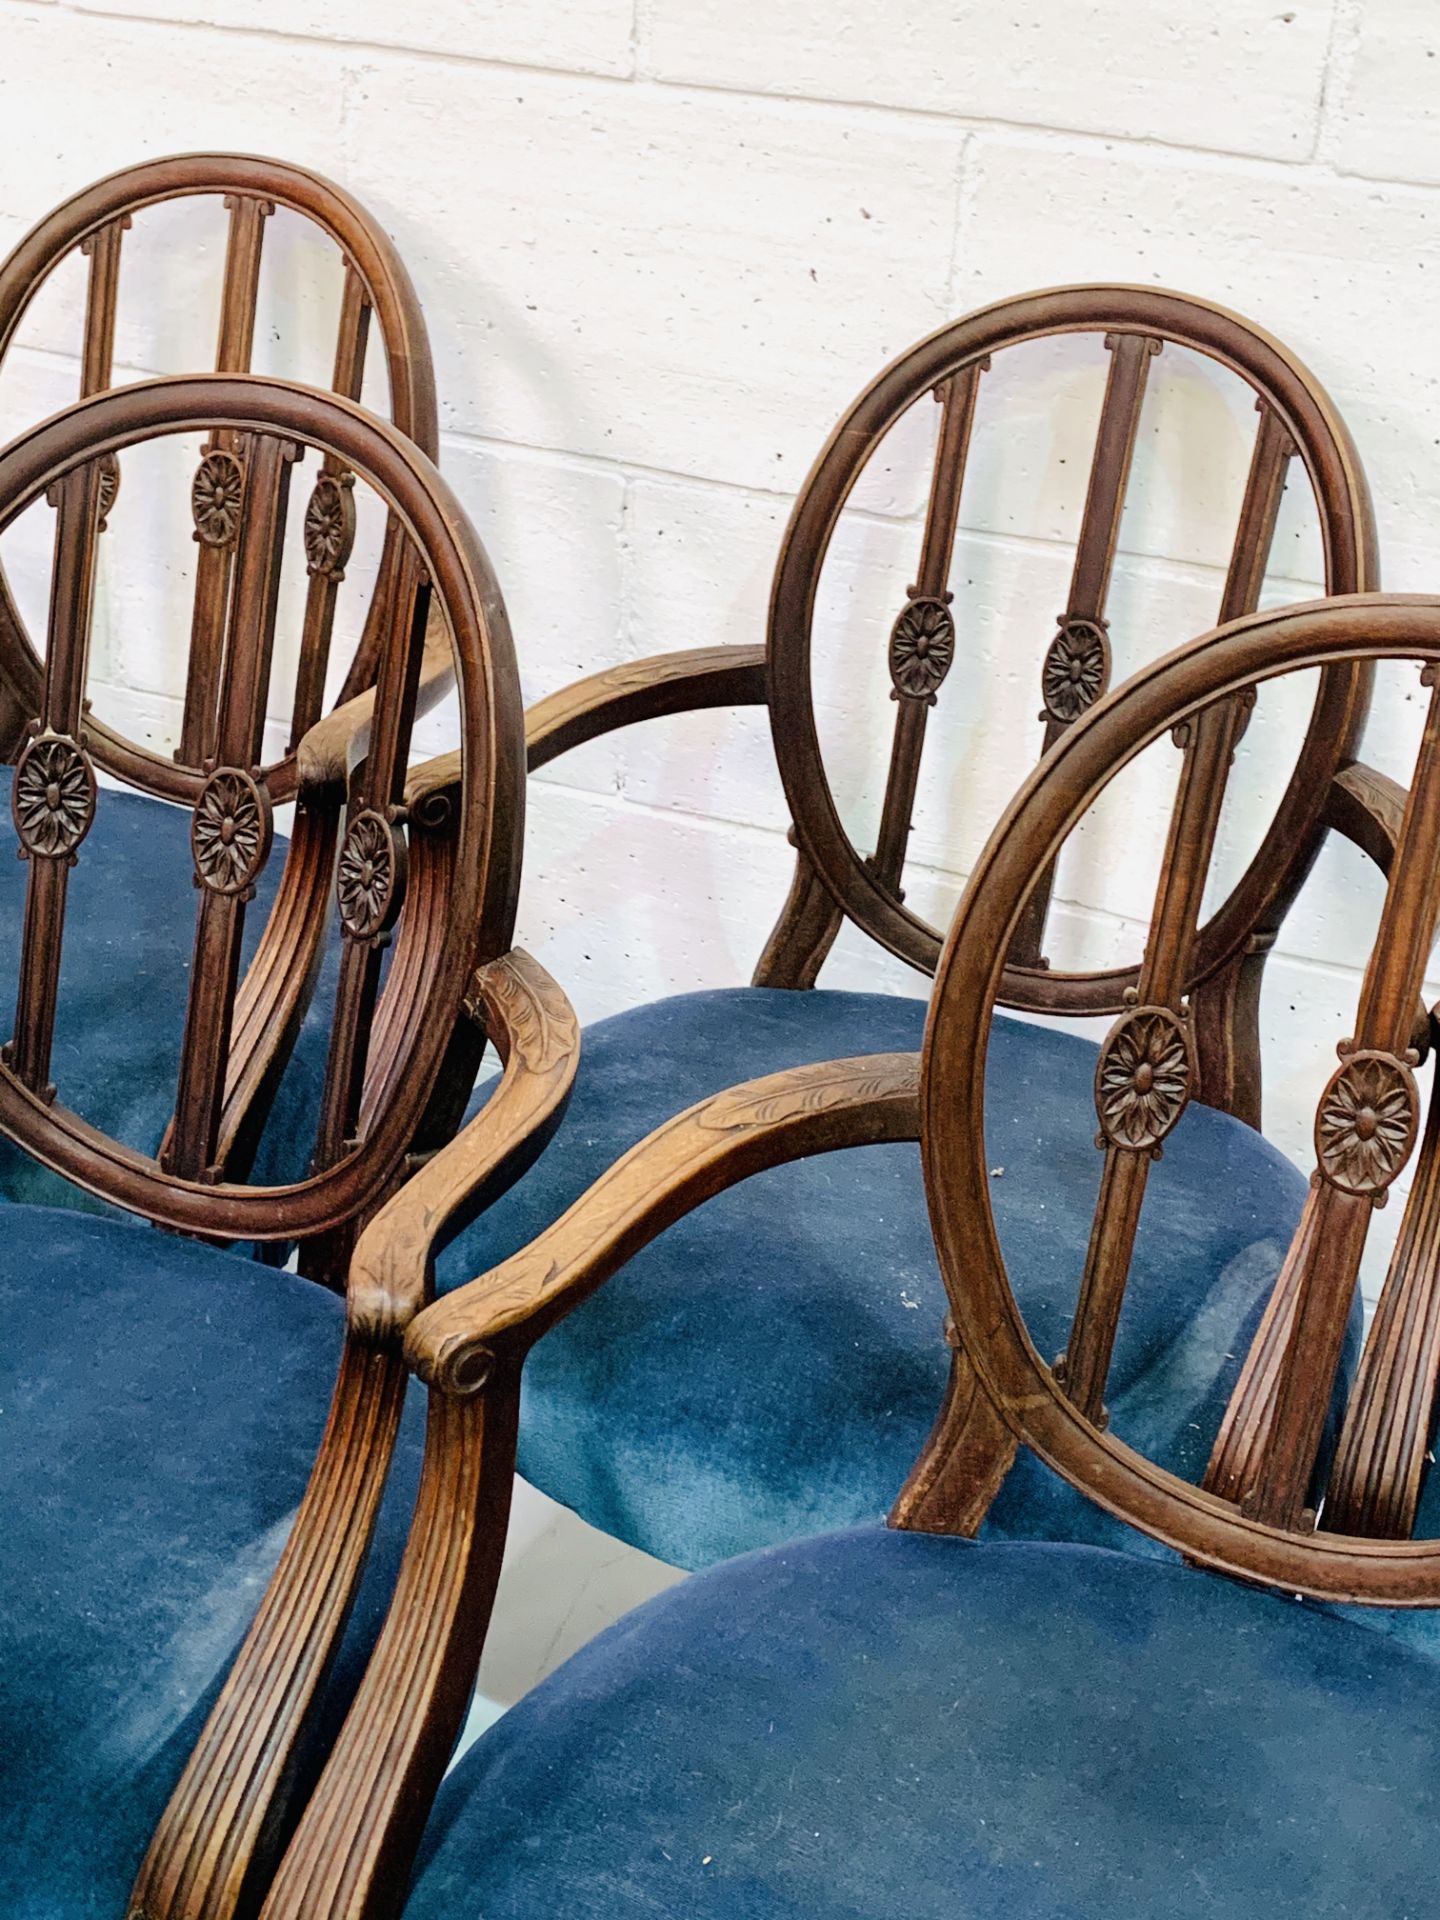 Set of eight mahogany Regency style open elbow chairs upholstered in petrol blue velvet. - Image 6 of 7